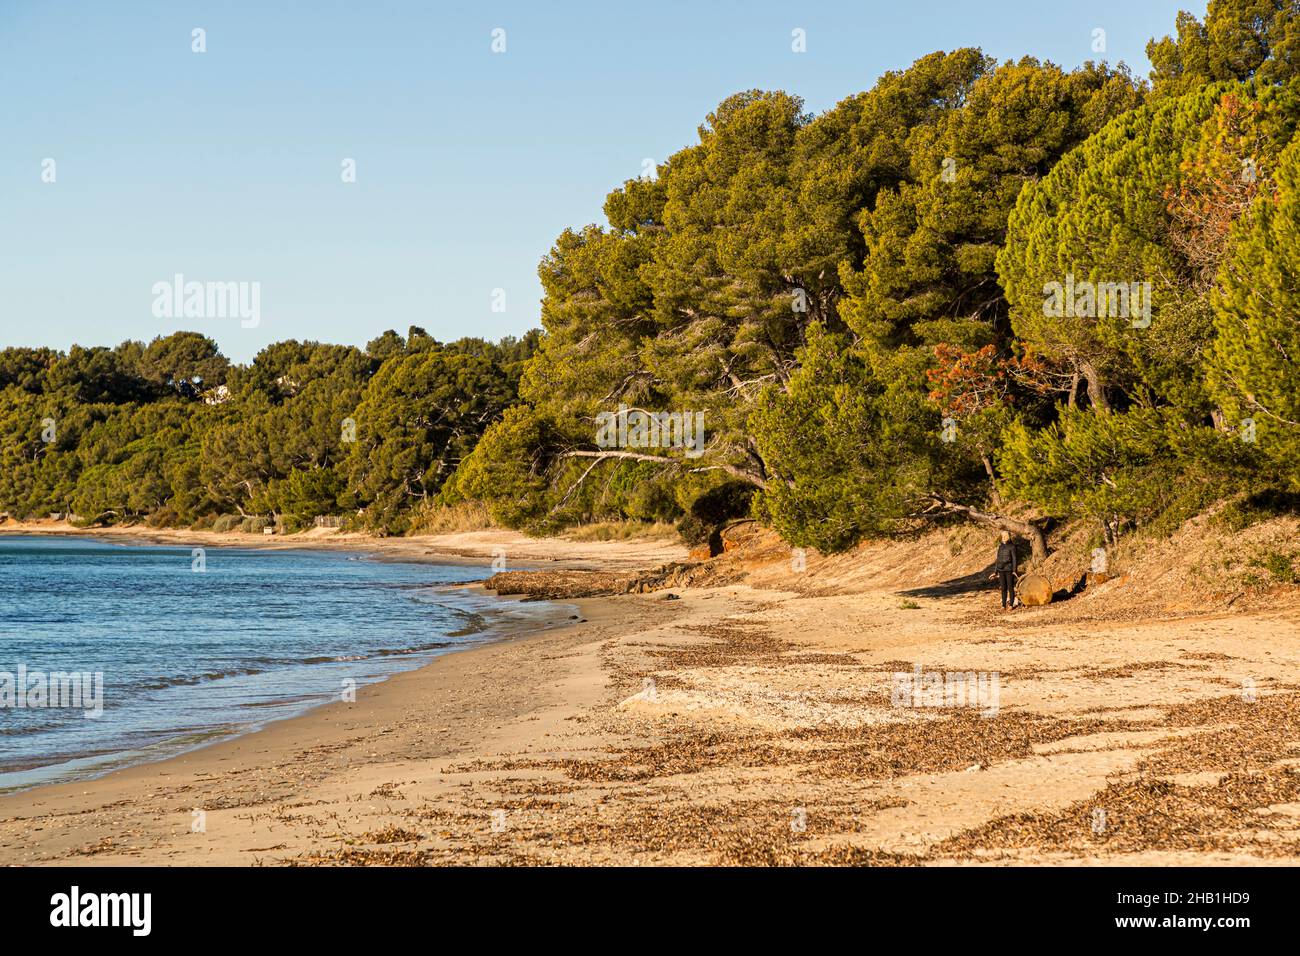 Ancient pine trees lean over the sandy beach of Cabasson near Bormes-les-Mimosas, France. Brégançon Fort, the former summer residence of the French prime ministers is not far away Stock Photo